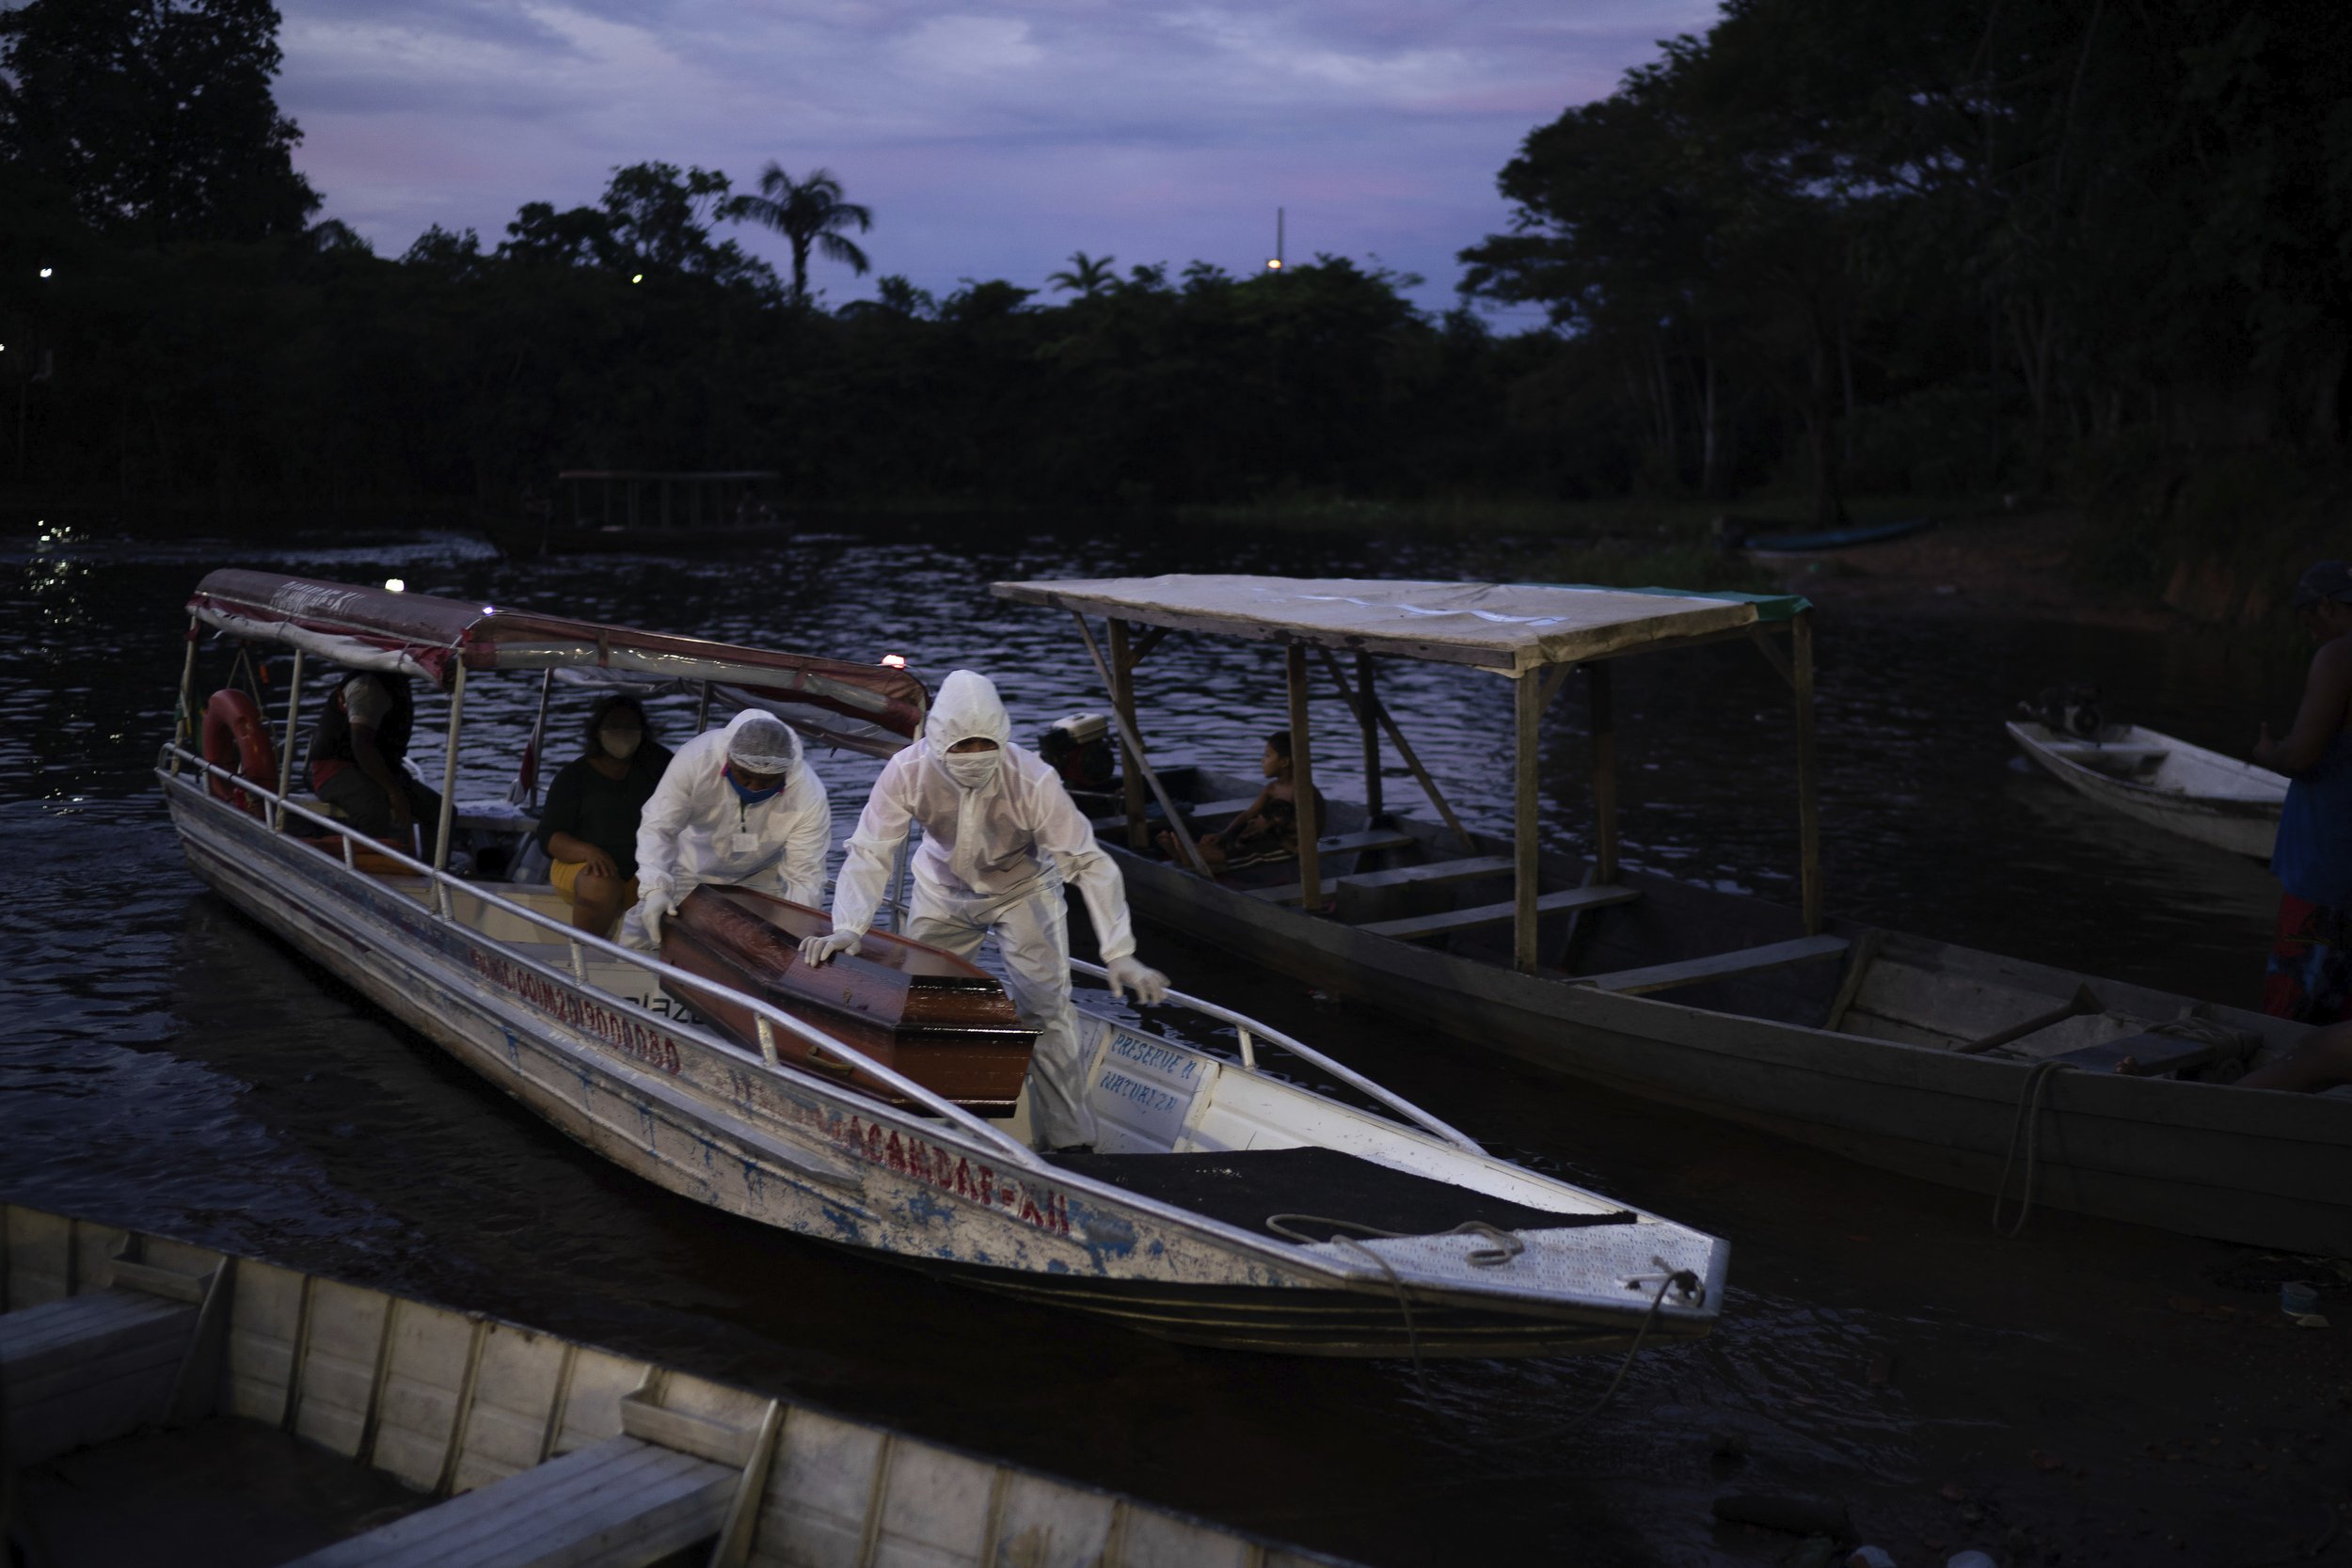  SOS Funeral workers transport by boat the coffin containing the body of a suspected COVID-19 victim that died in a river-side community near Manaus, Brazil on May 14, 2020. The victim, an 86-year-old woman, lived by the Negro river, the largest trib